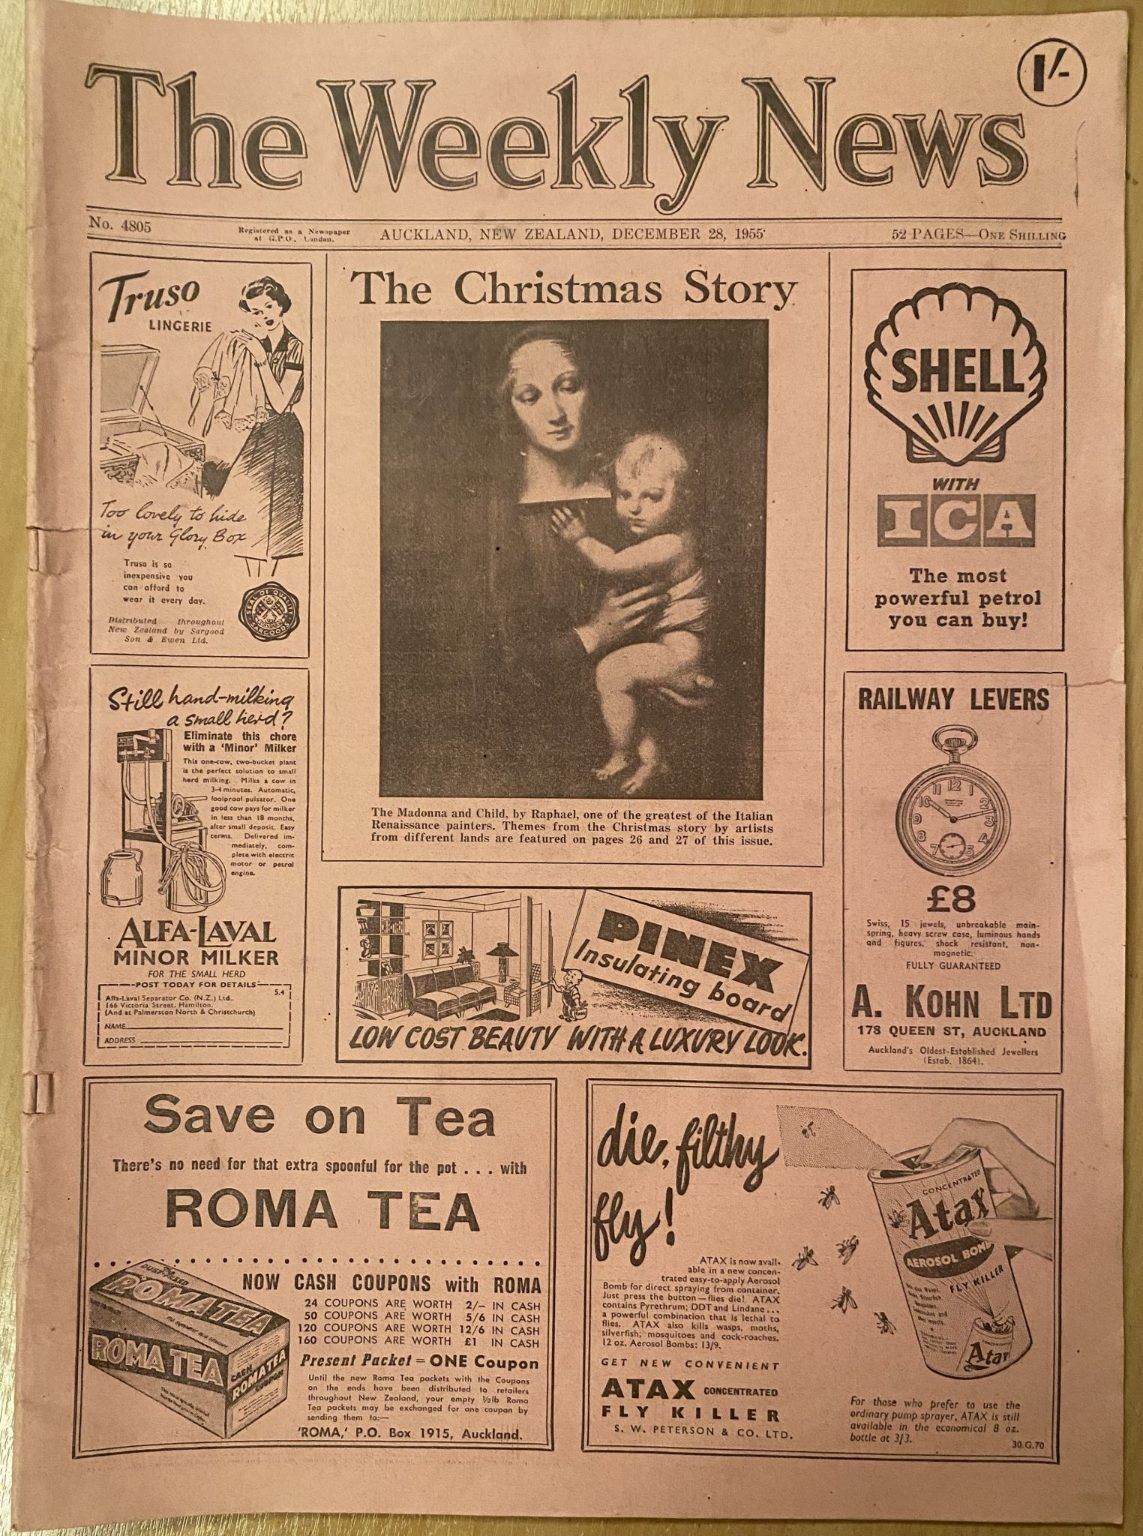 OLD NEWSPAPER: The Weekly News - No. 4805, 28 December 1955